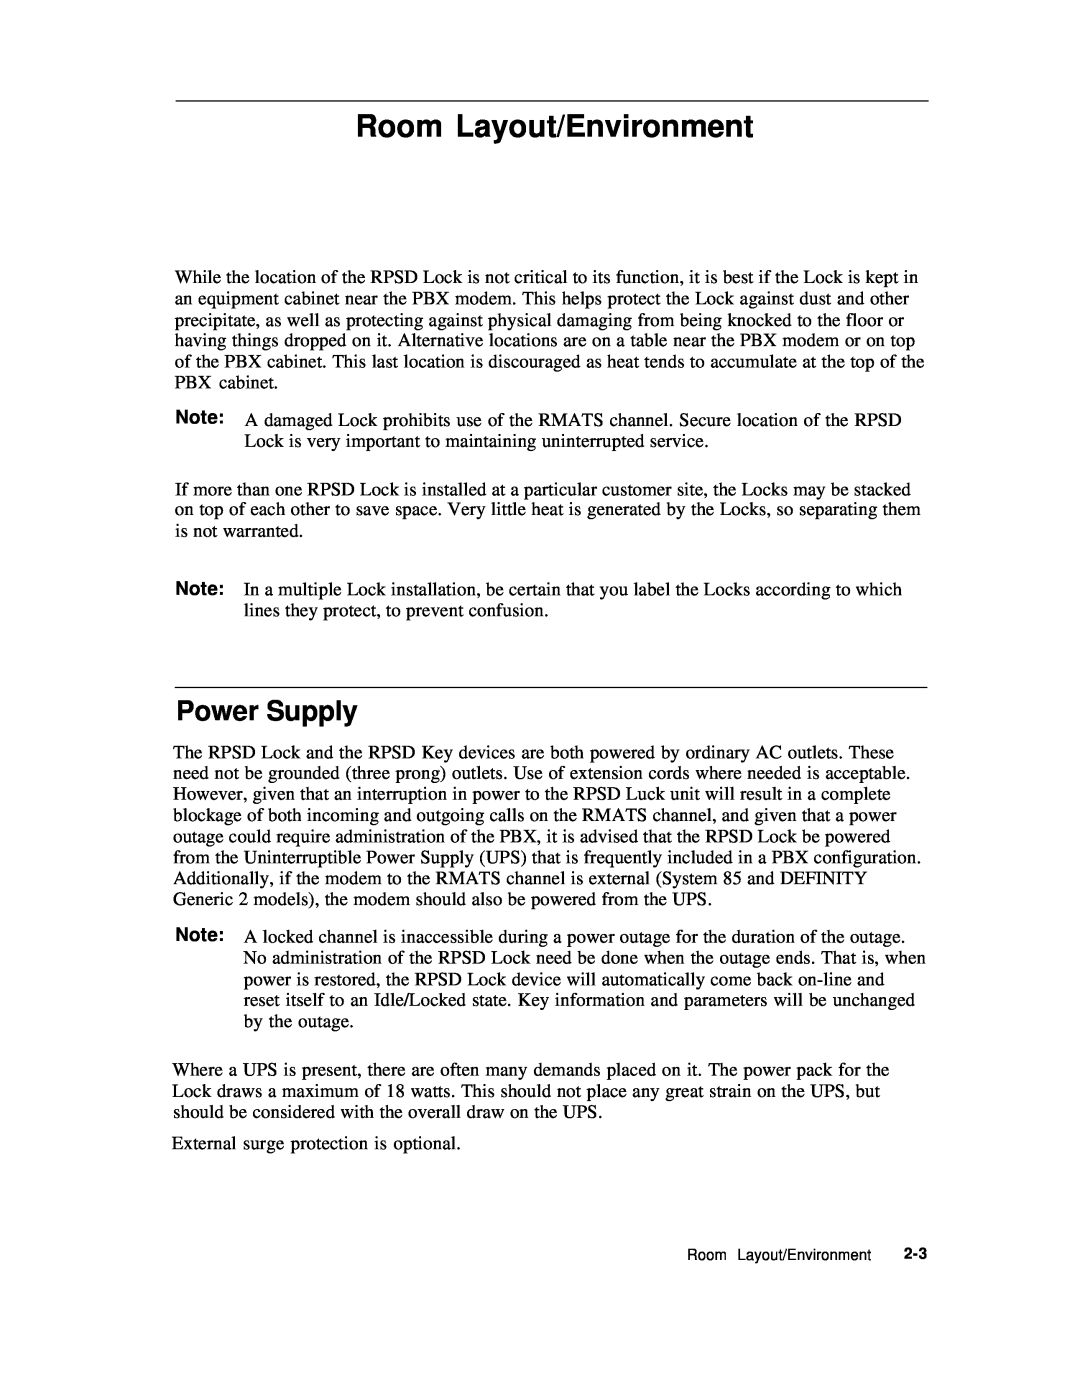 AT&T Remote Port Security Device user manual Room Layout/Environment, Power Supply 